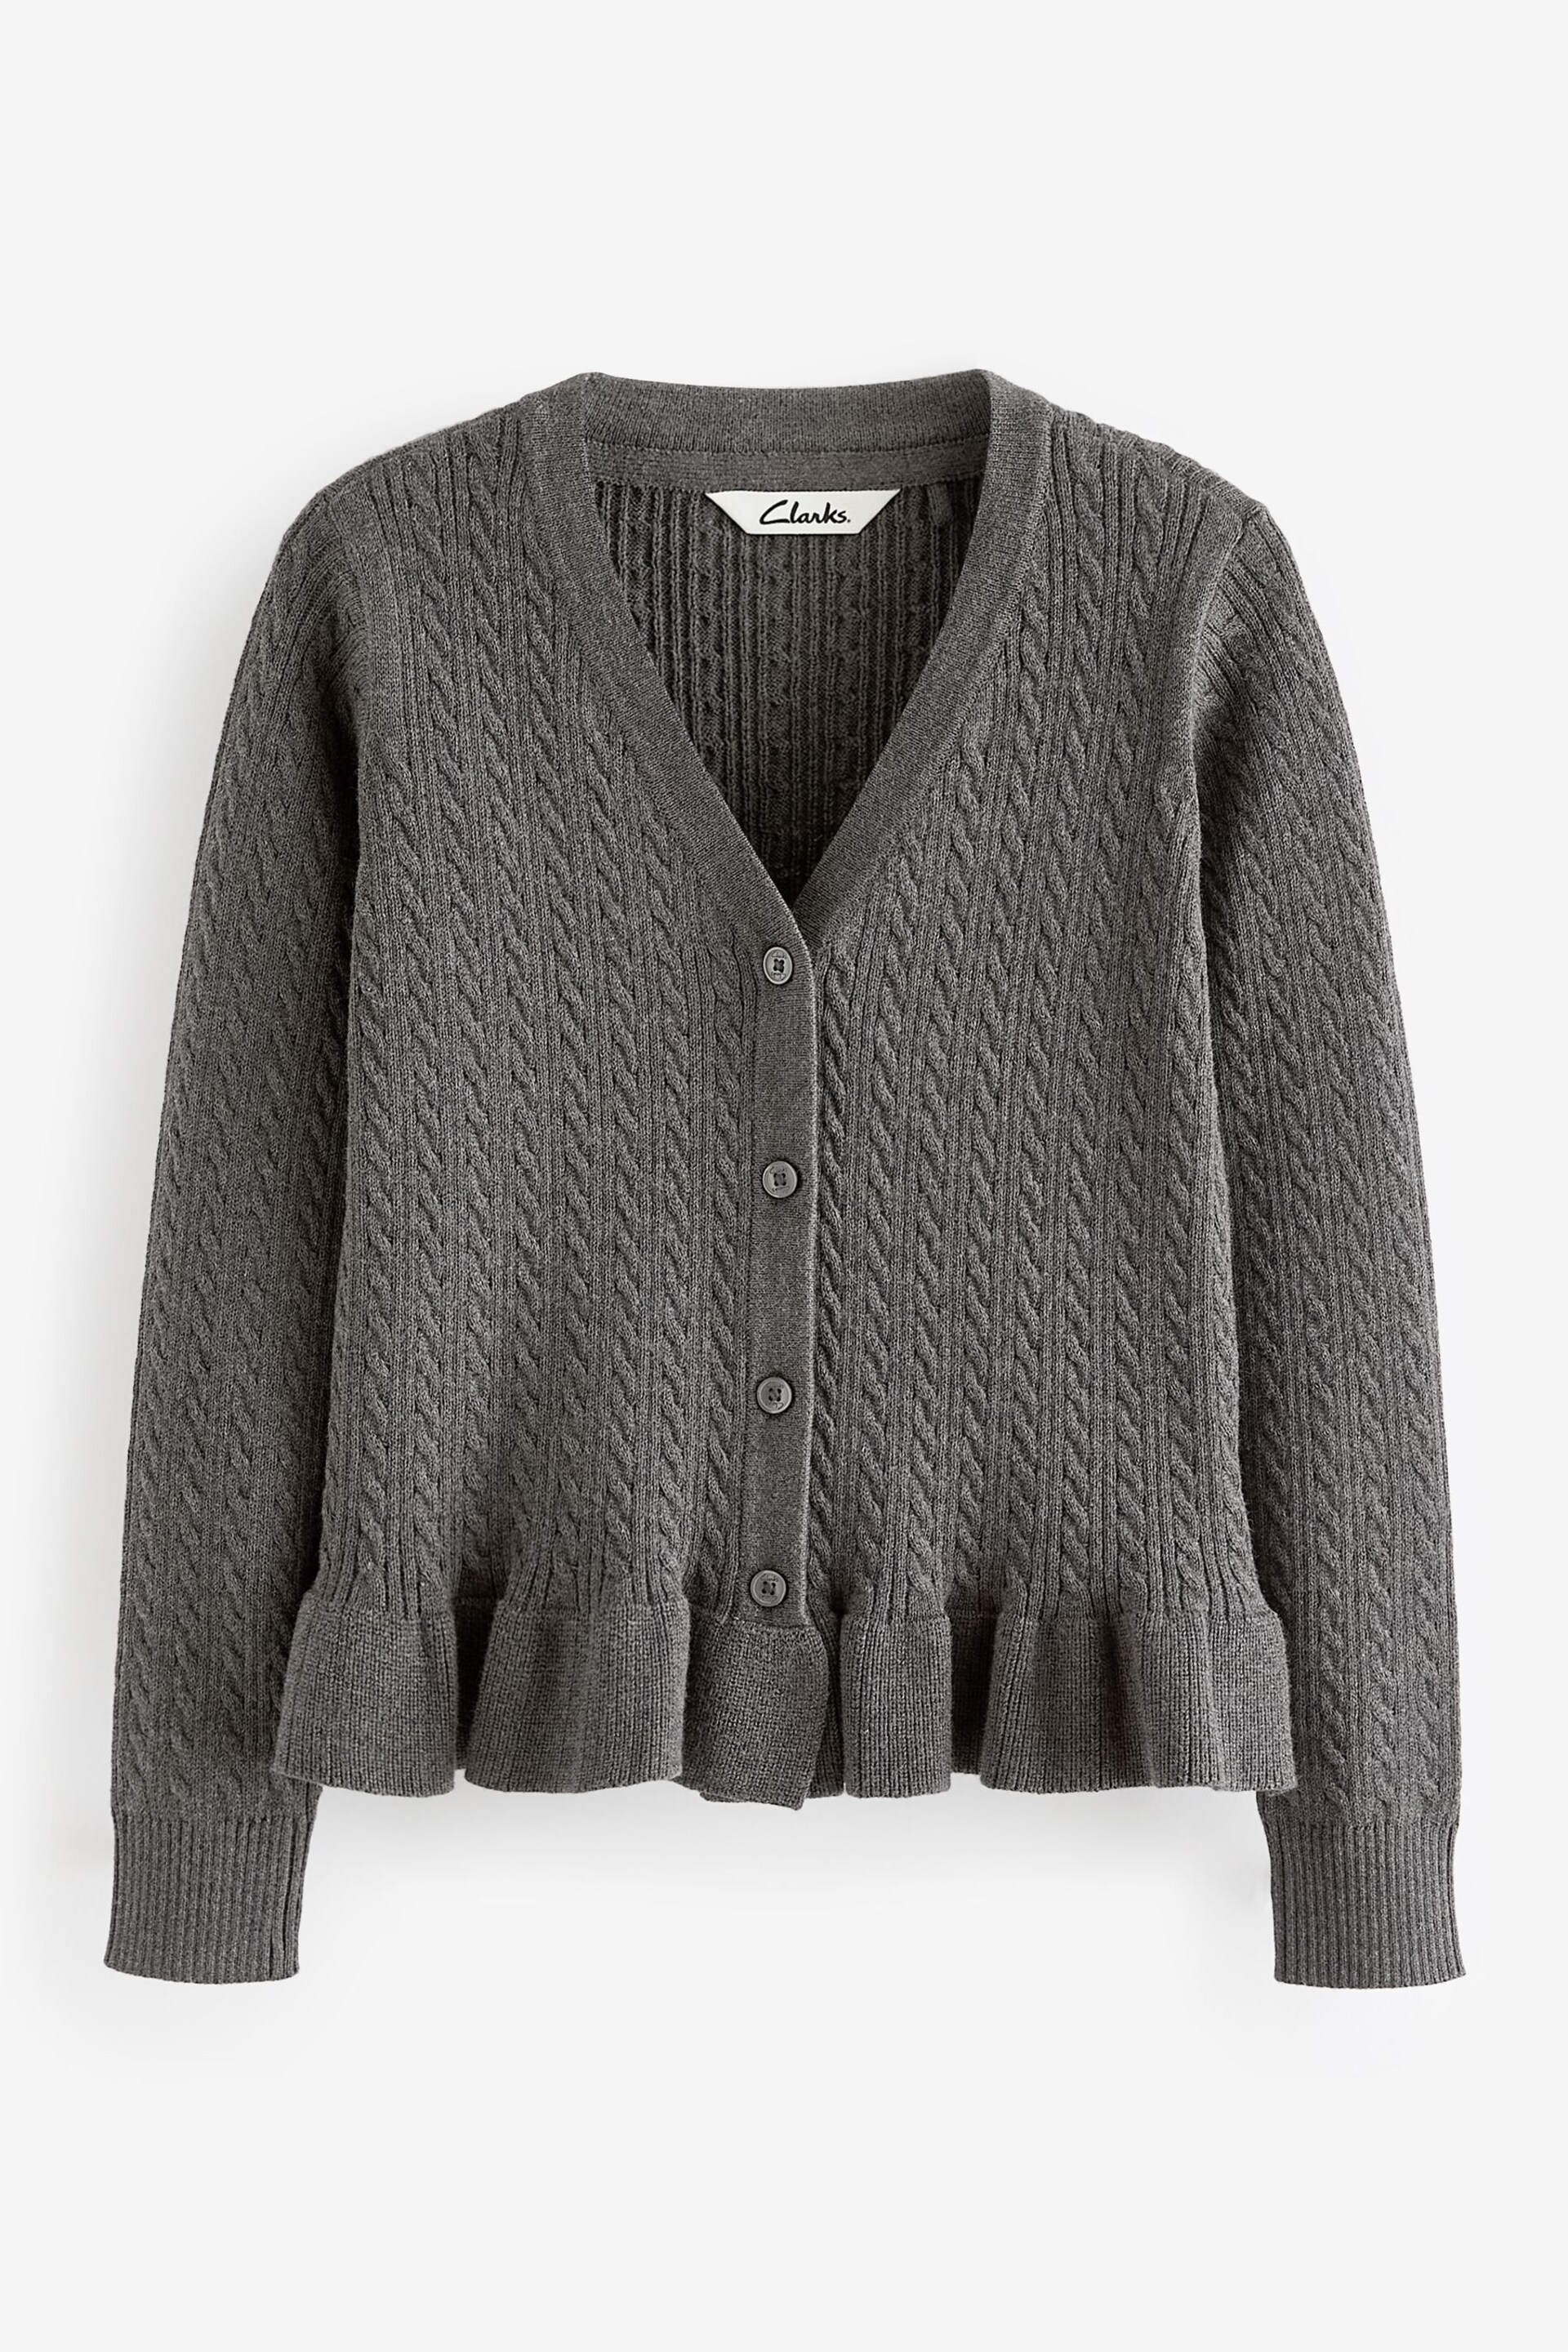 Clarks Grey School Cable Knit Cardigan - Image 4 of 4